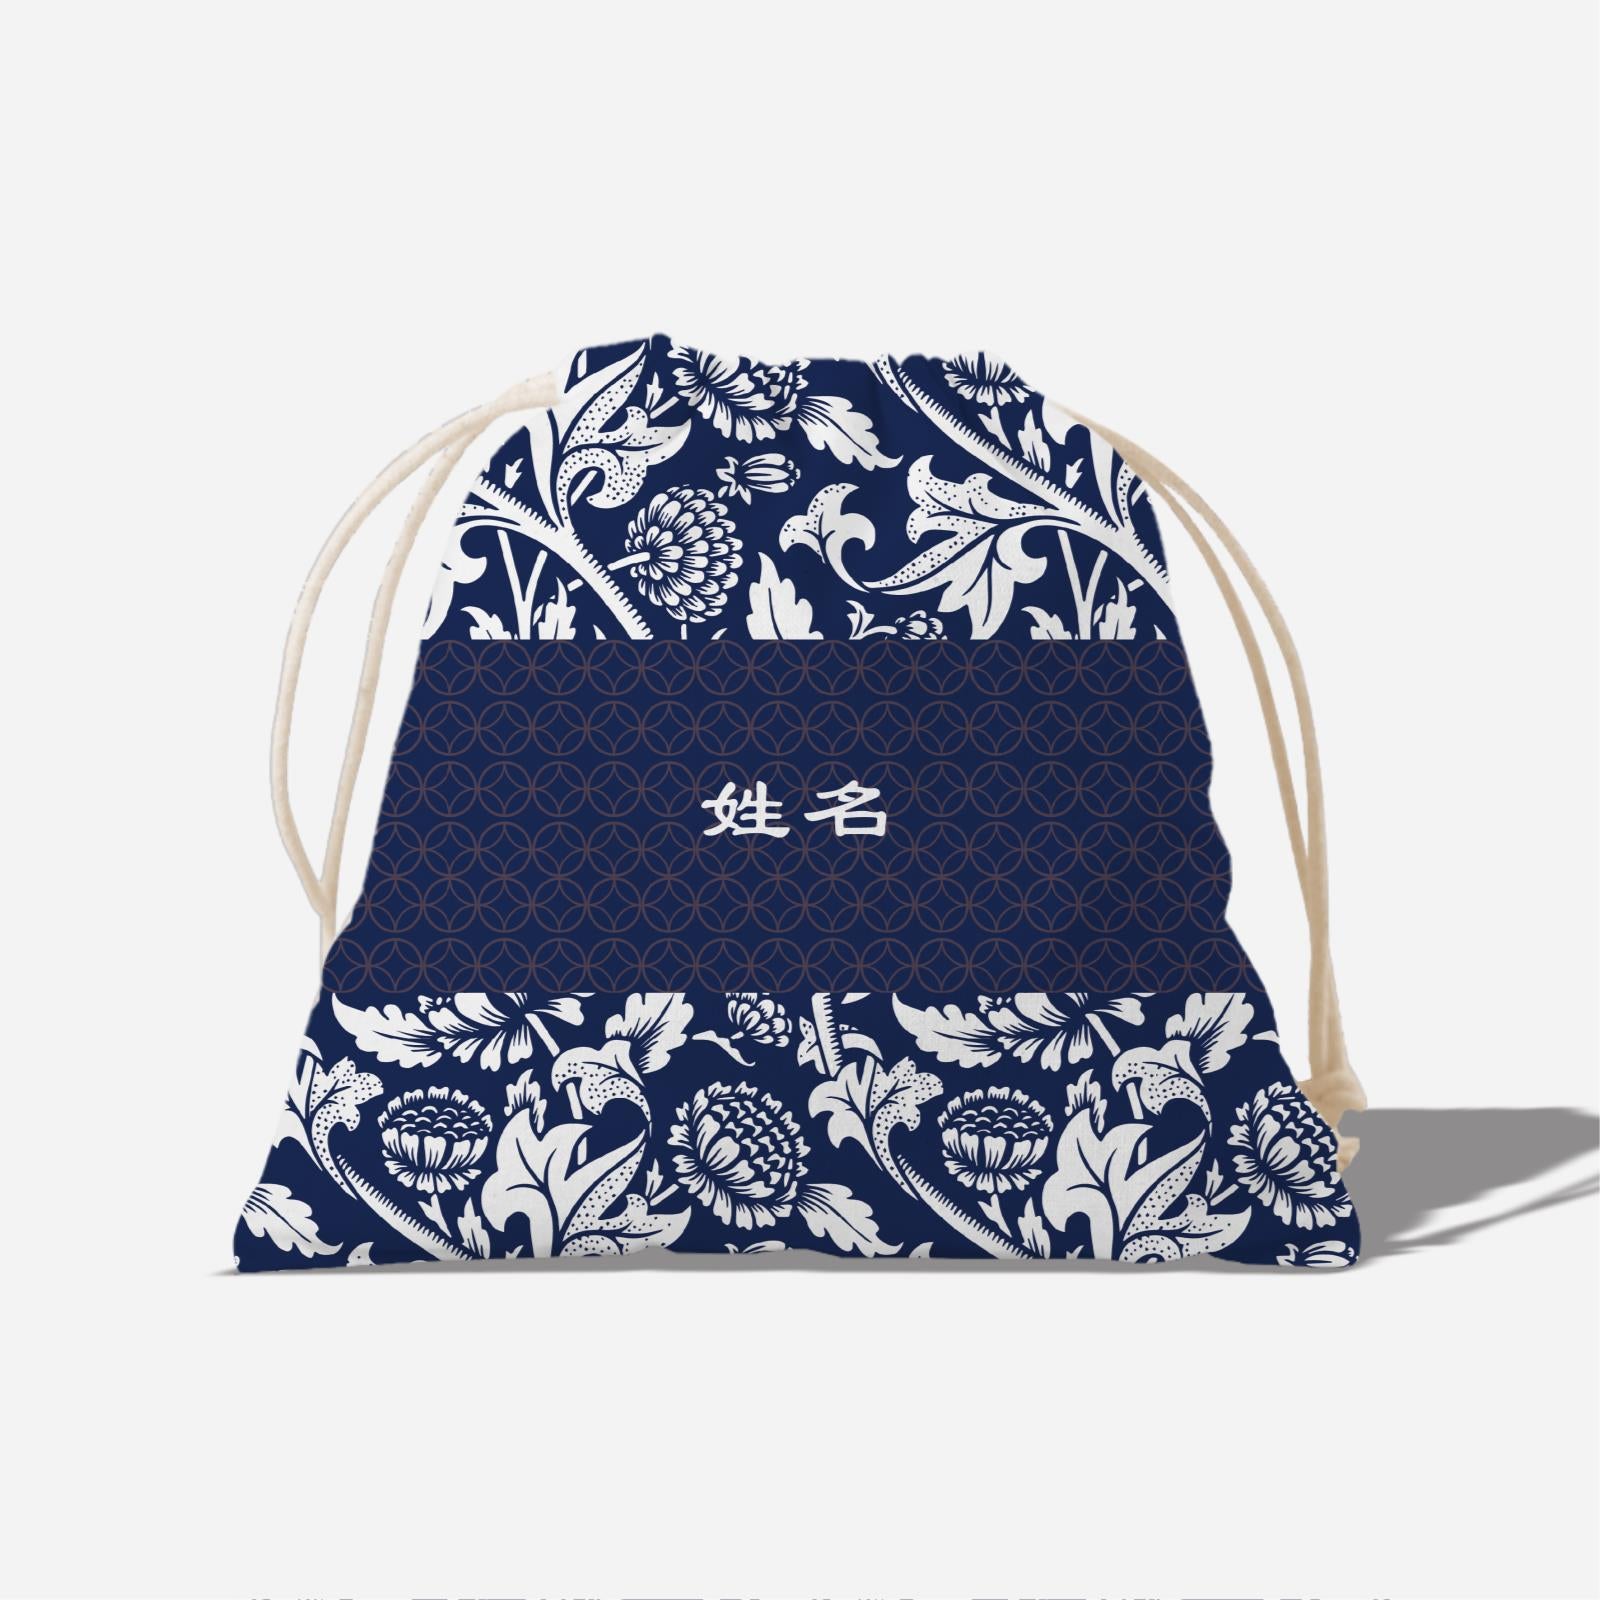 Limitless Opportunity Series - Blue Full Print Satchel With Chinese Personalization